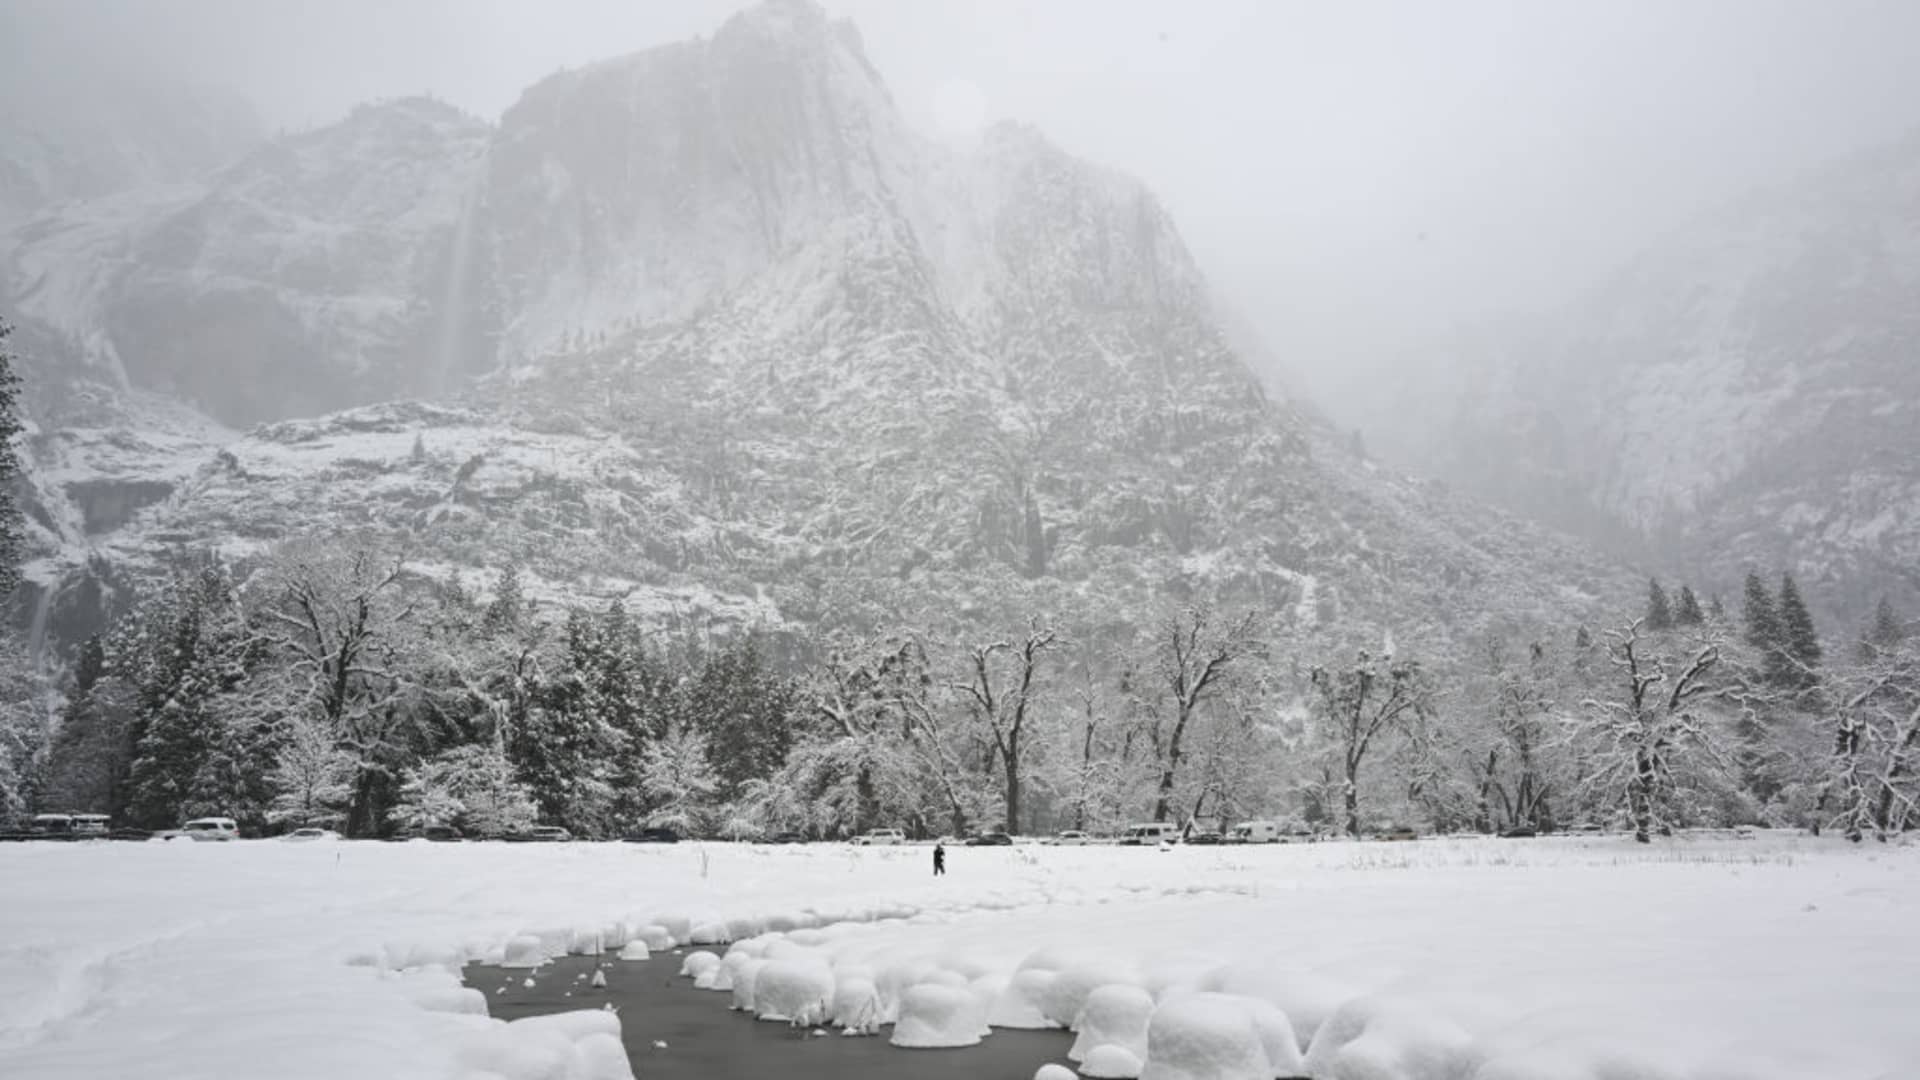 Snow blankets Yosemite National Park in California, United States on February 23, 2023 as winter storm alerted in California.